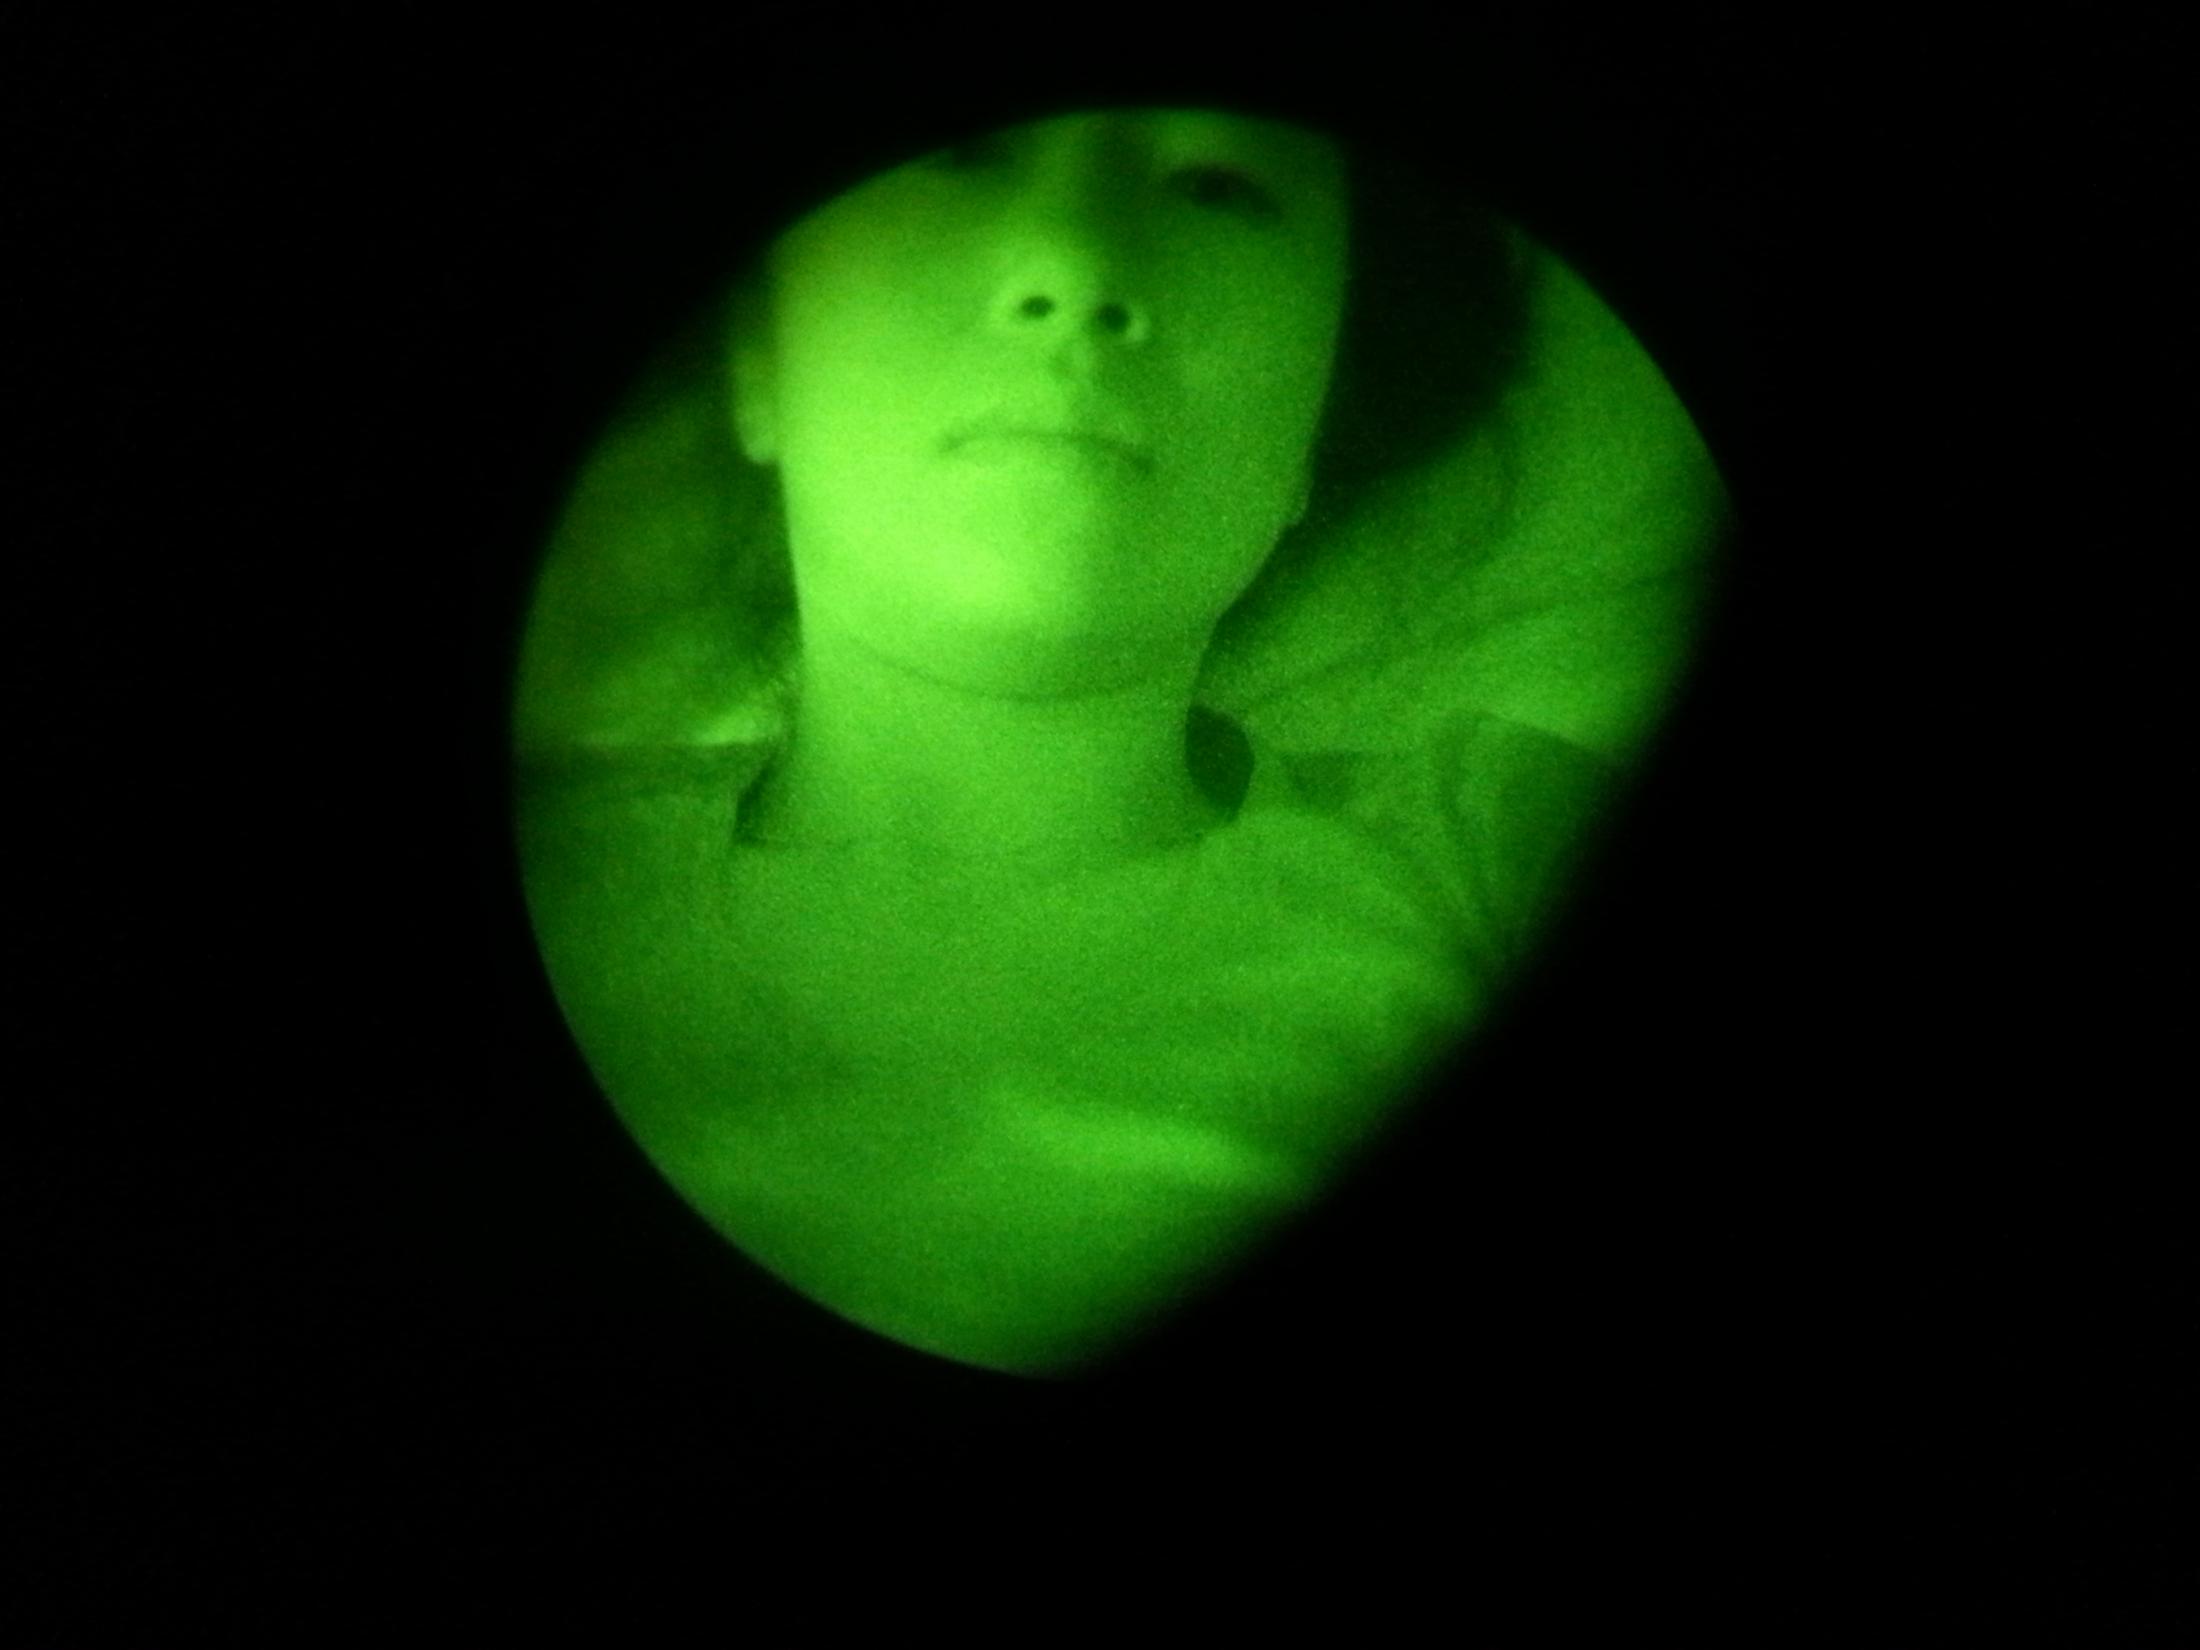 Happy Anniversary from Afghanistan - I take a self portrait through John's night vision...